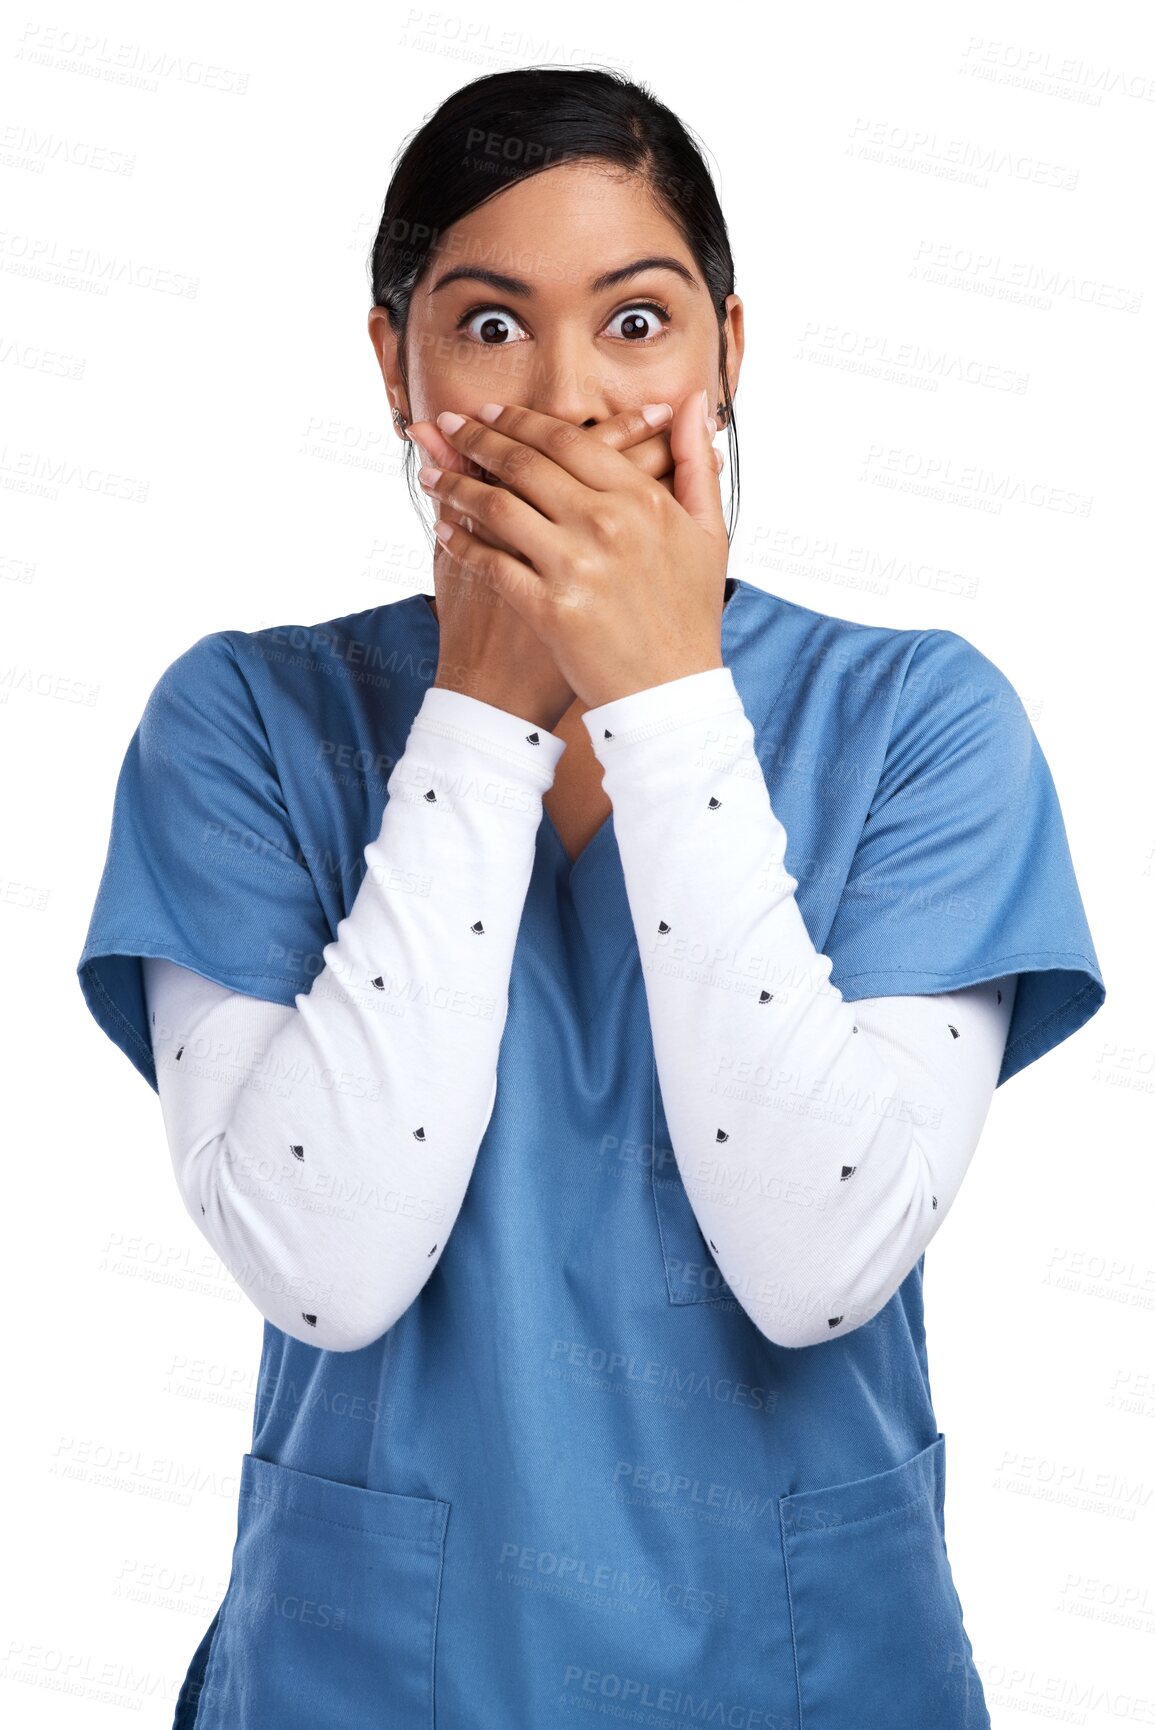 Buy stock photo Healthcare, shocked and medical nurse woman isolated on a transparent, png background. Face of professional person, surgeon or doctor with hands on mouth for wow surprise, miracle or announcement